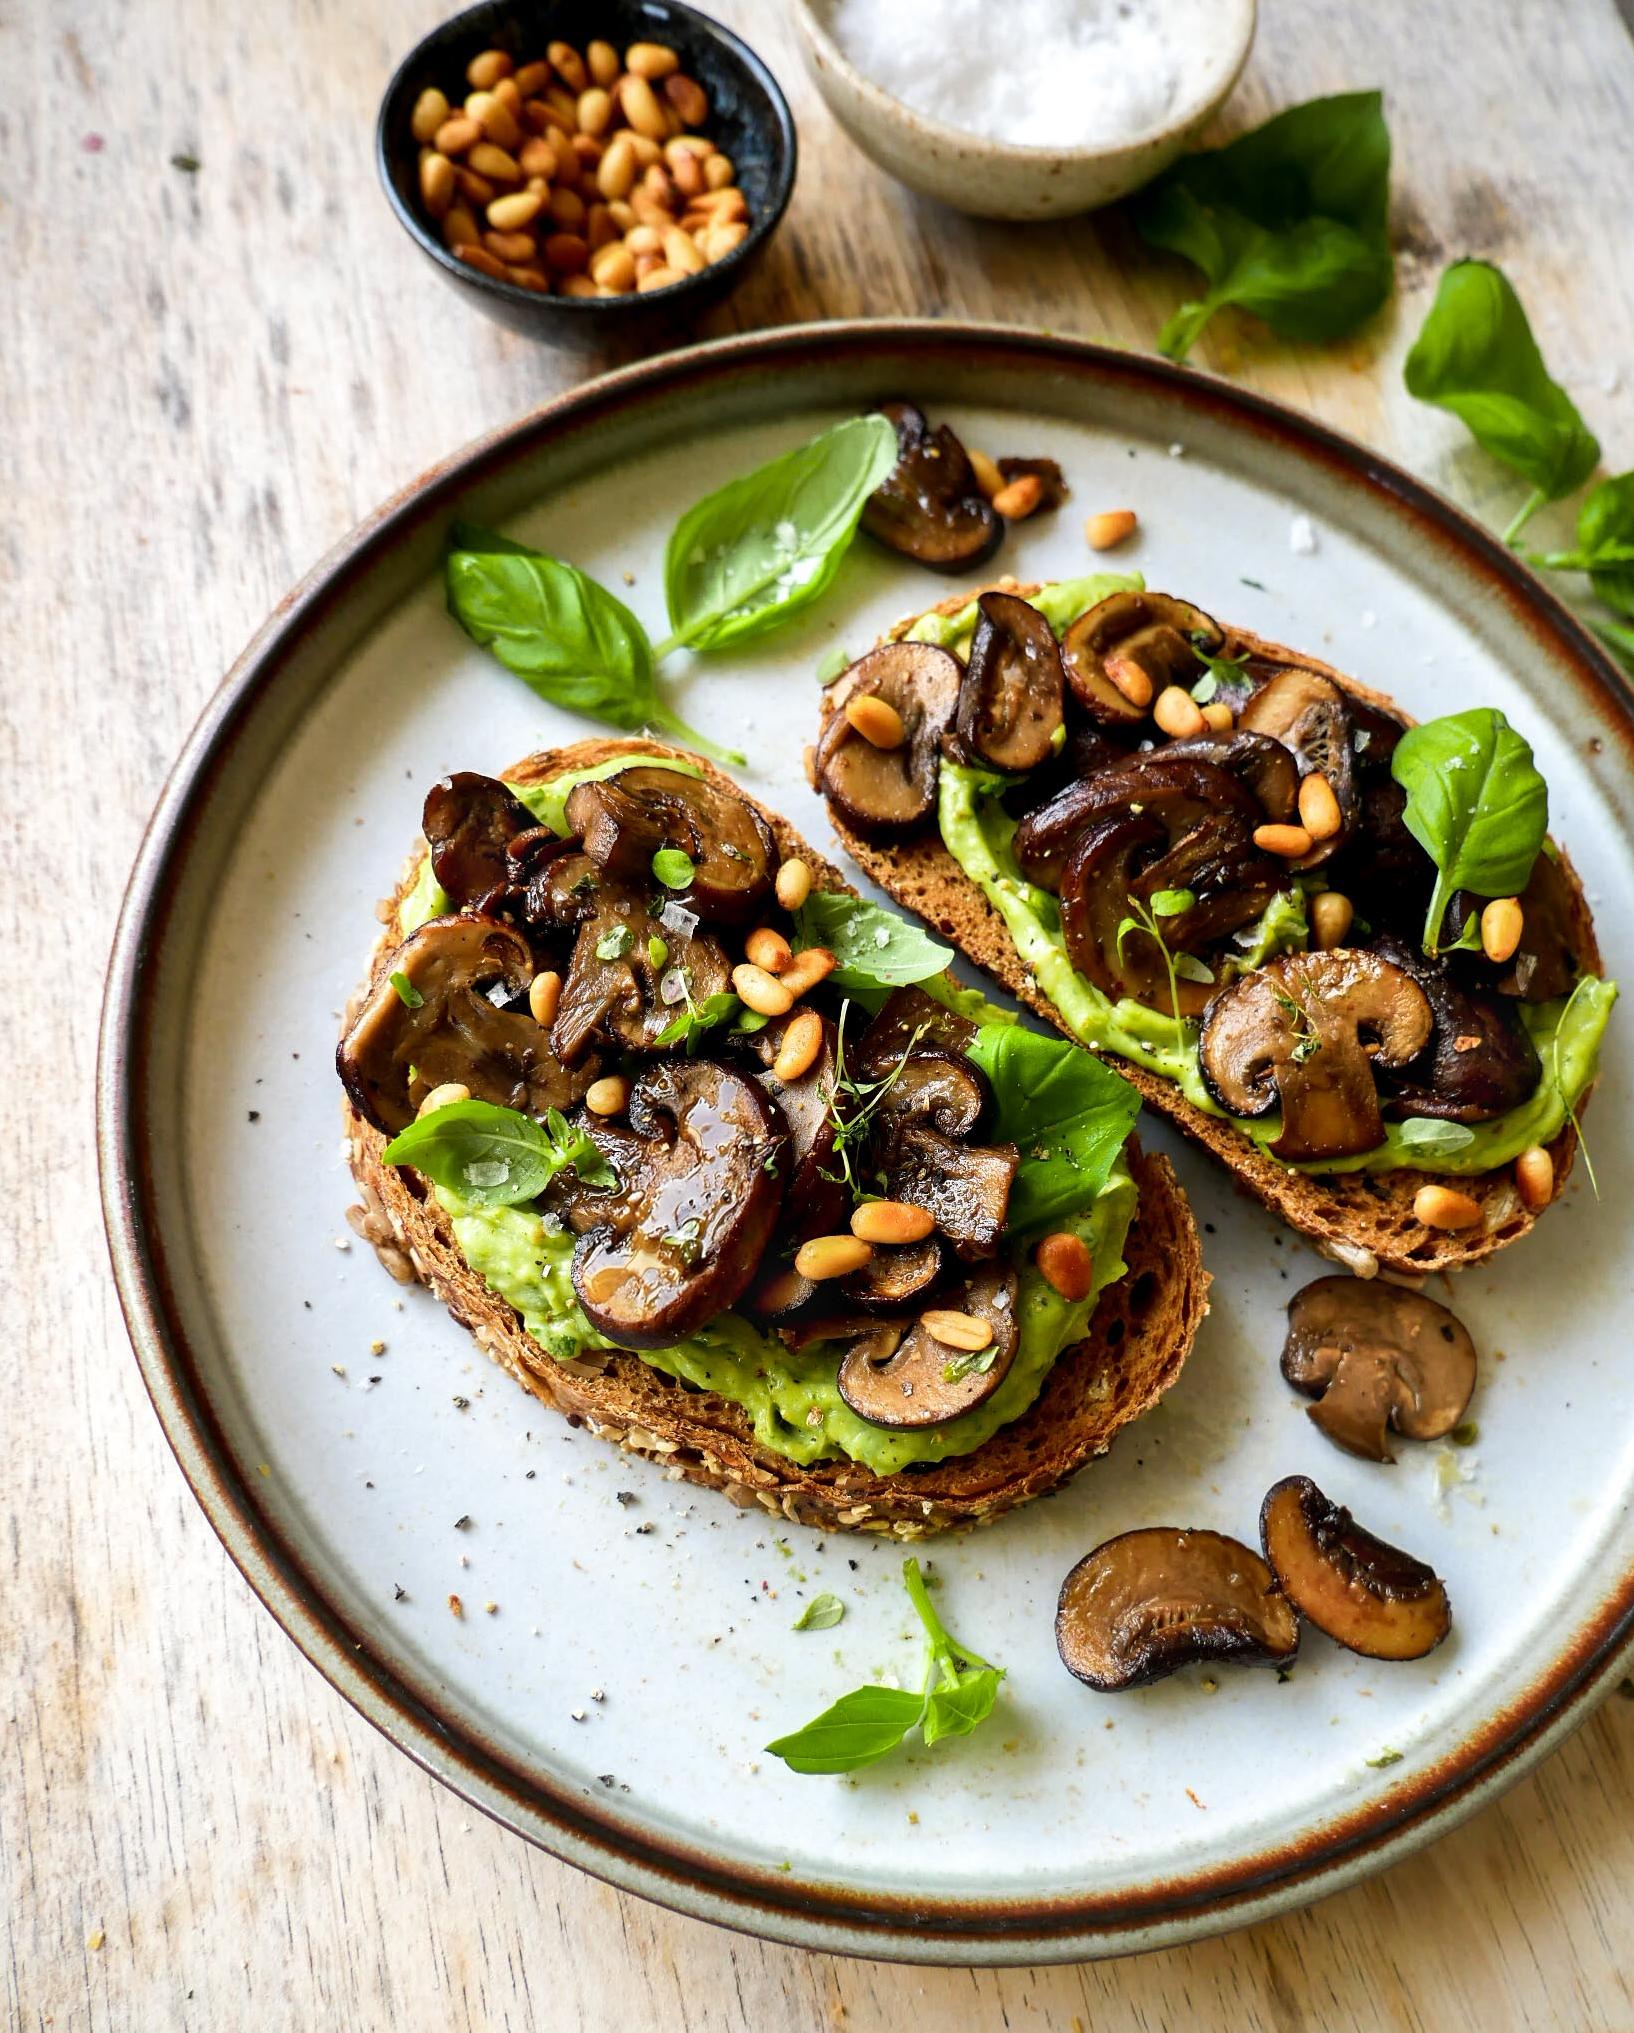  A vegan toast packed with nutrients and flavors!